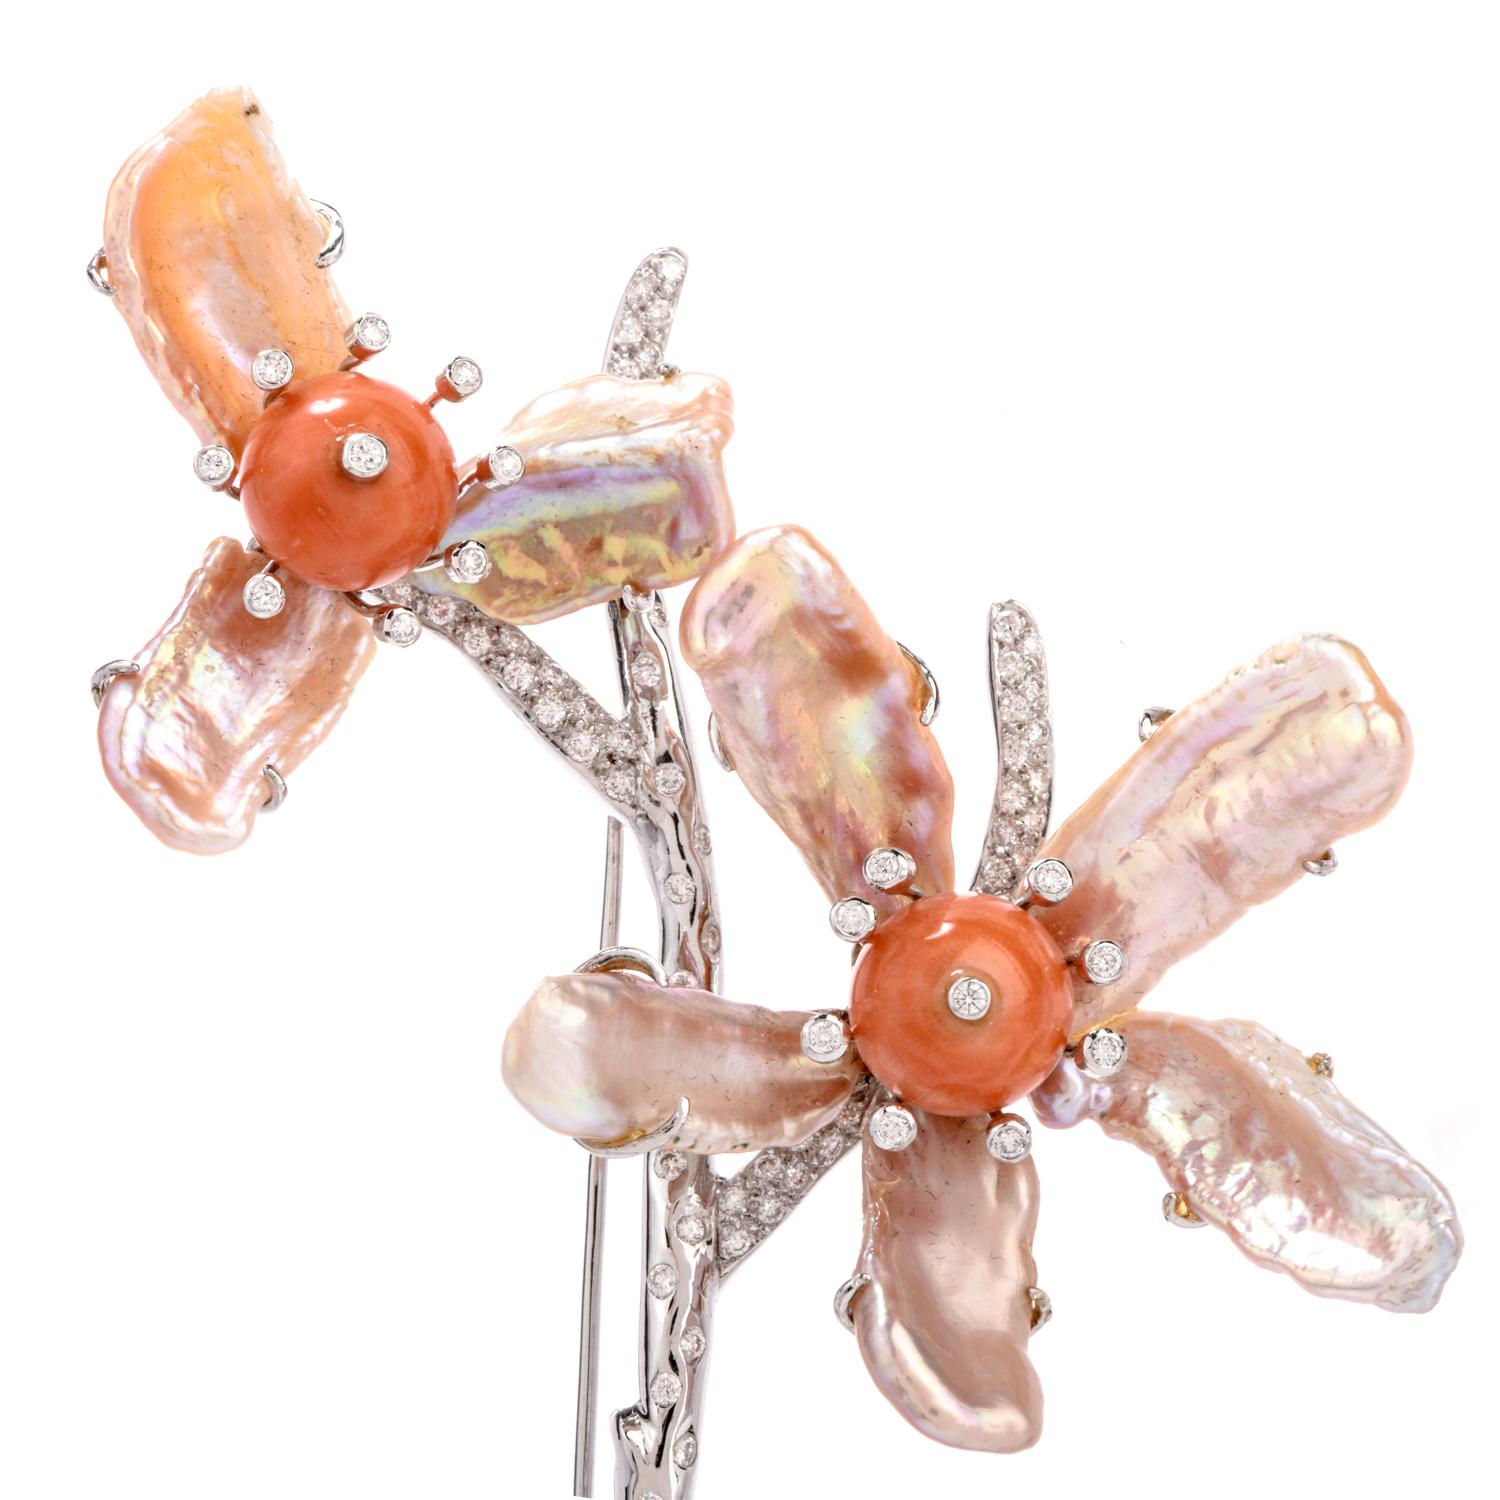 This large Love me Not Floral brooch pin was crafted in 

40.7 grams of luxurious 18K white gold.

Adorning the cetner of each of the 2 flowers are single beads of

red coral measuring appx. 11mm each.

The centers are nestled into the 8